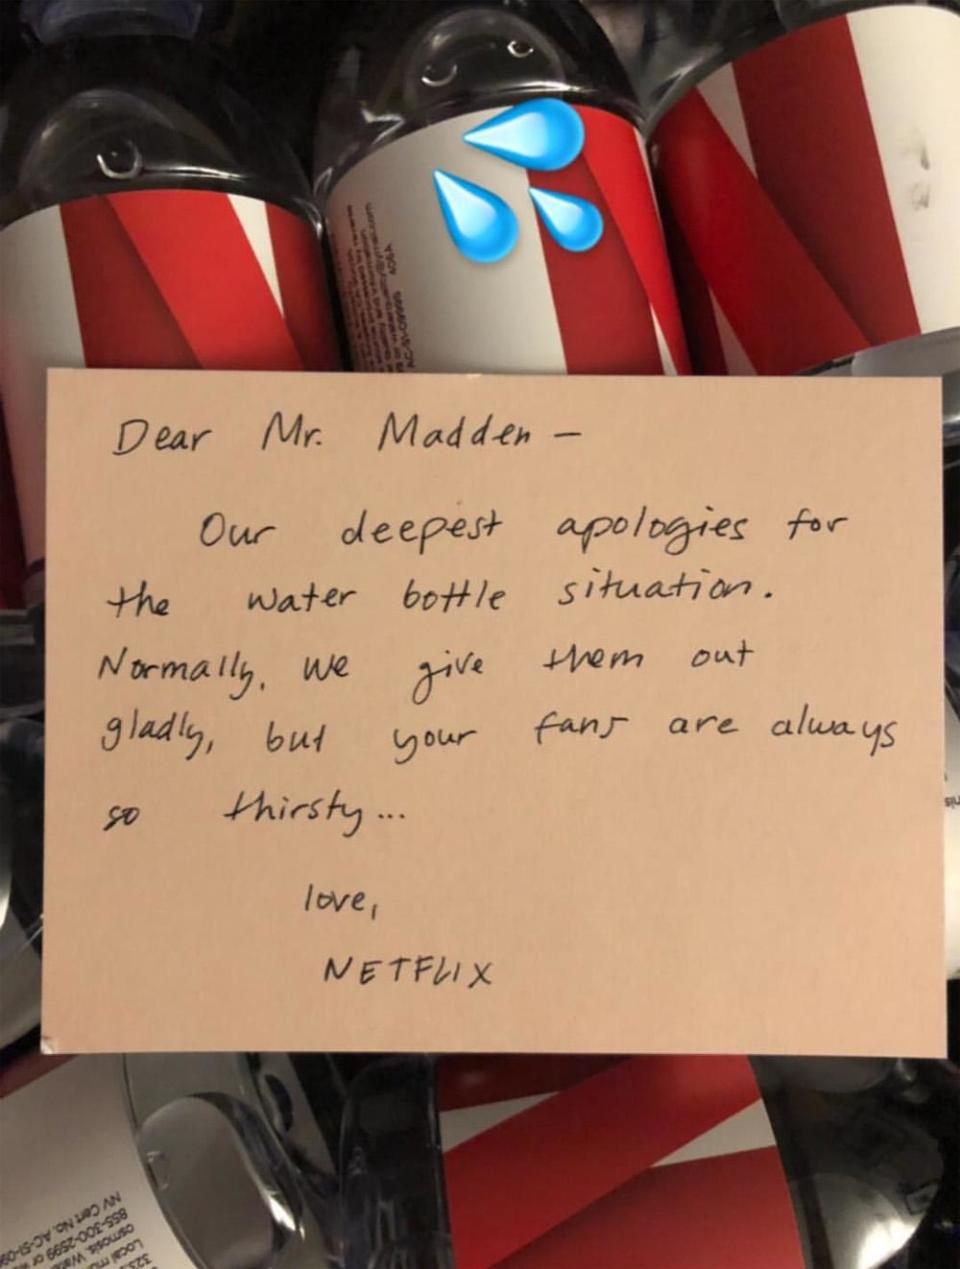 Feeling thirsty: Richard Madden received an hilarious apology from Netflix (Instagram/ Richard Madden)